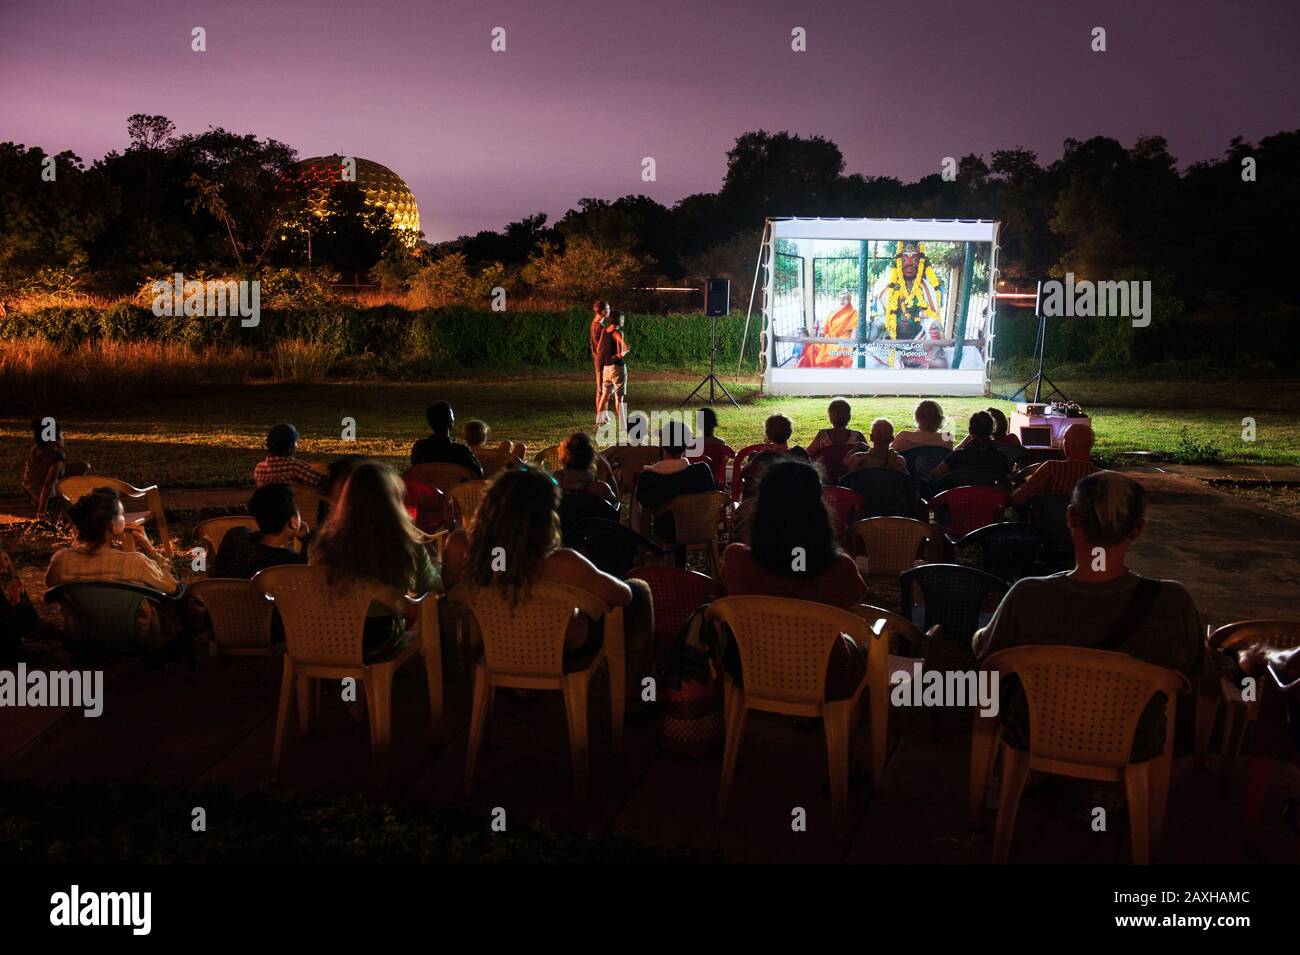 AUROVILLE, INDIA - Auroville Film Festival 2015. Screening movies about Human Unity in the outdoor venue between Town Hall and Matrimandir gardens. Stock Photo